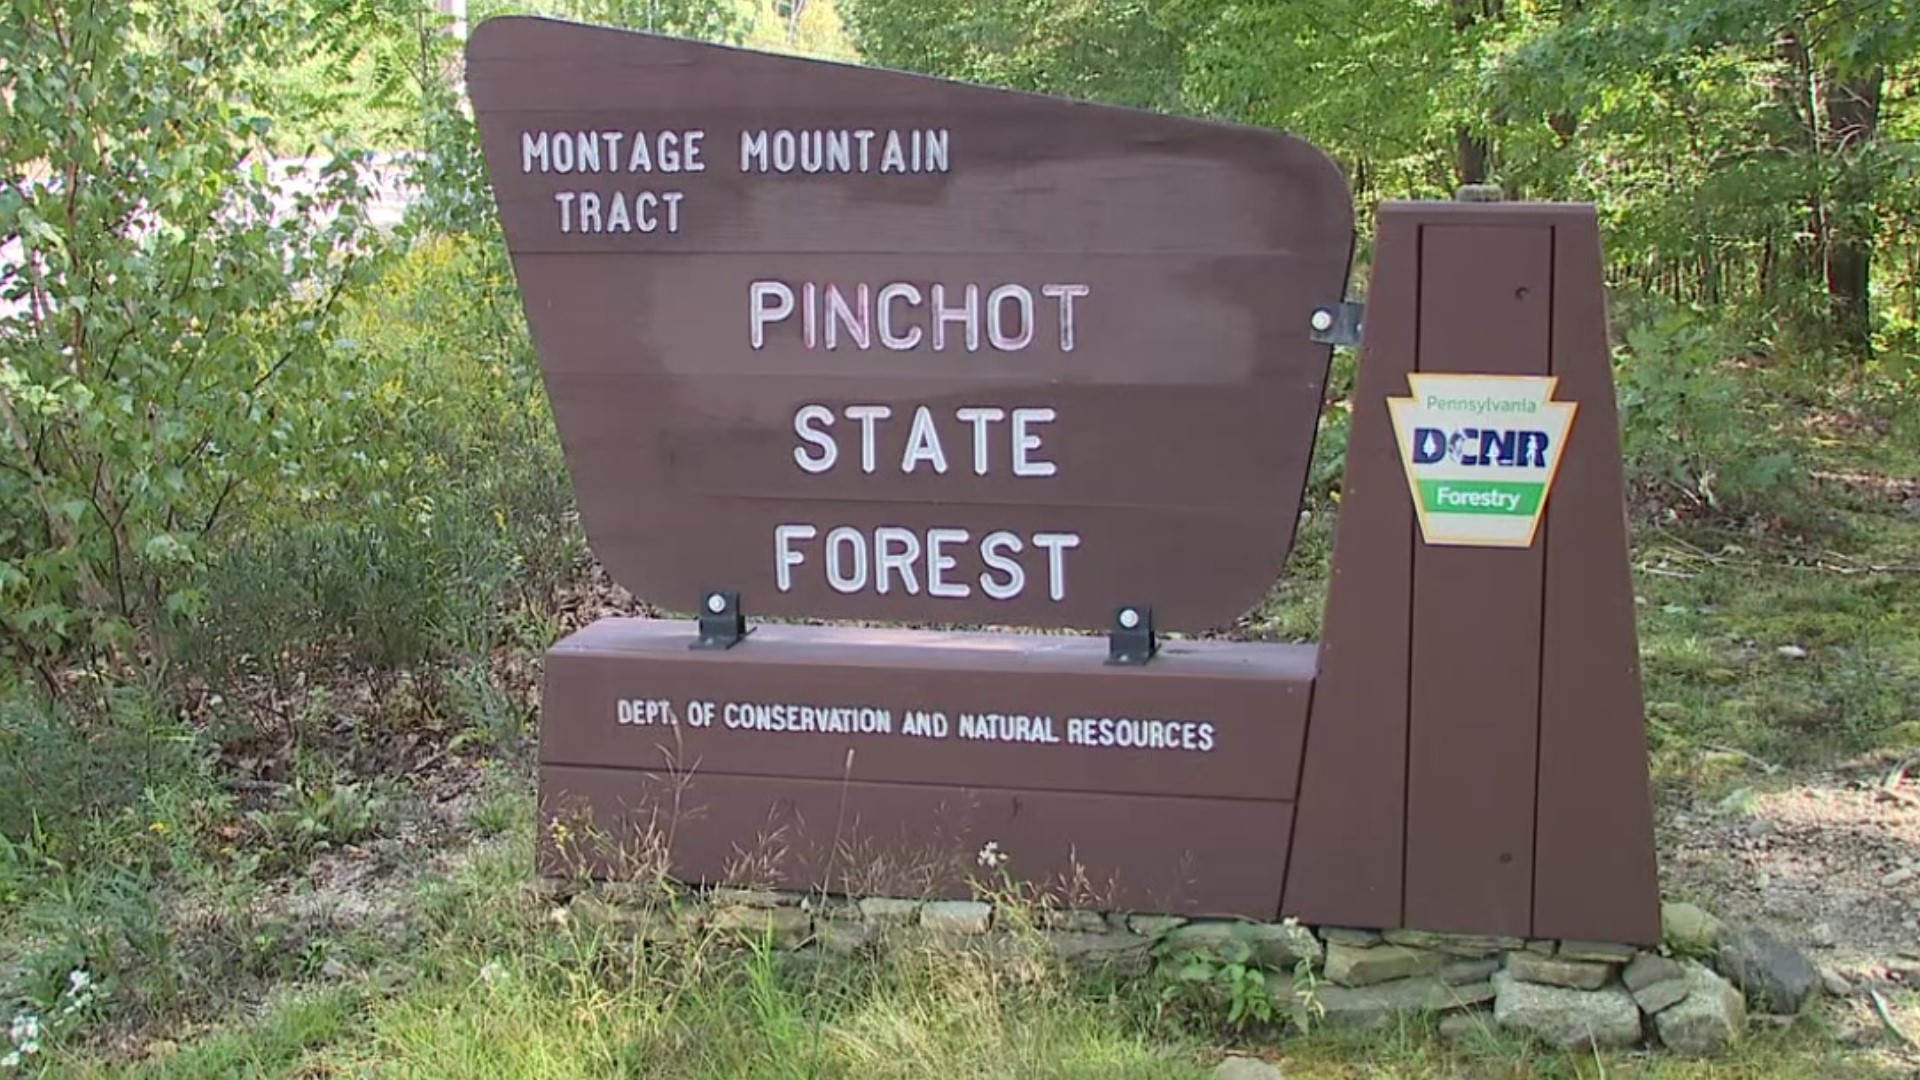 Newswatch 16's Courtney Harrison spoke with forestry officials about the importance of keeping the environment intact.